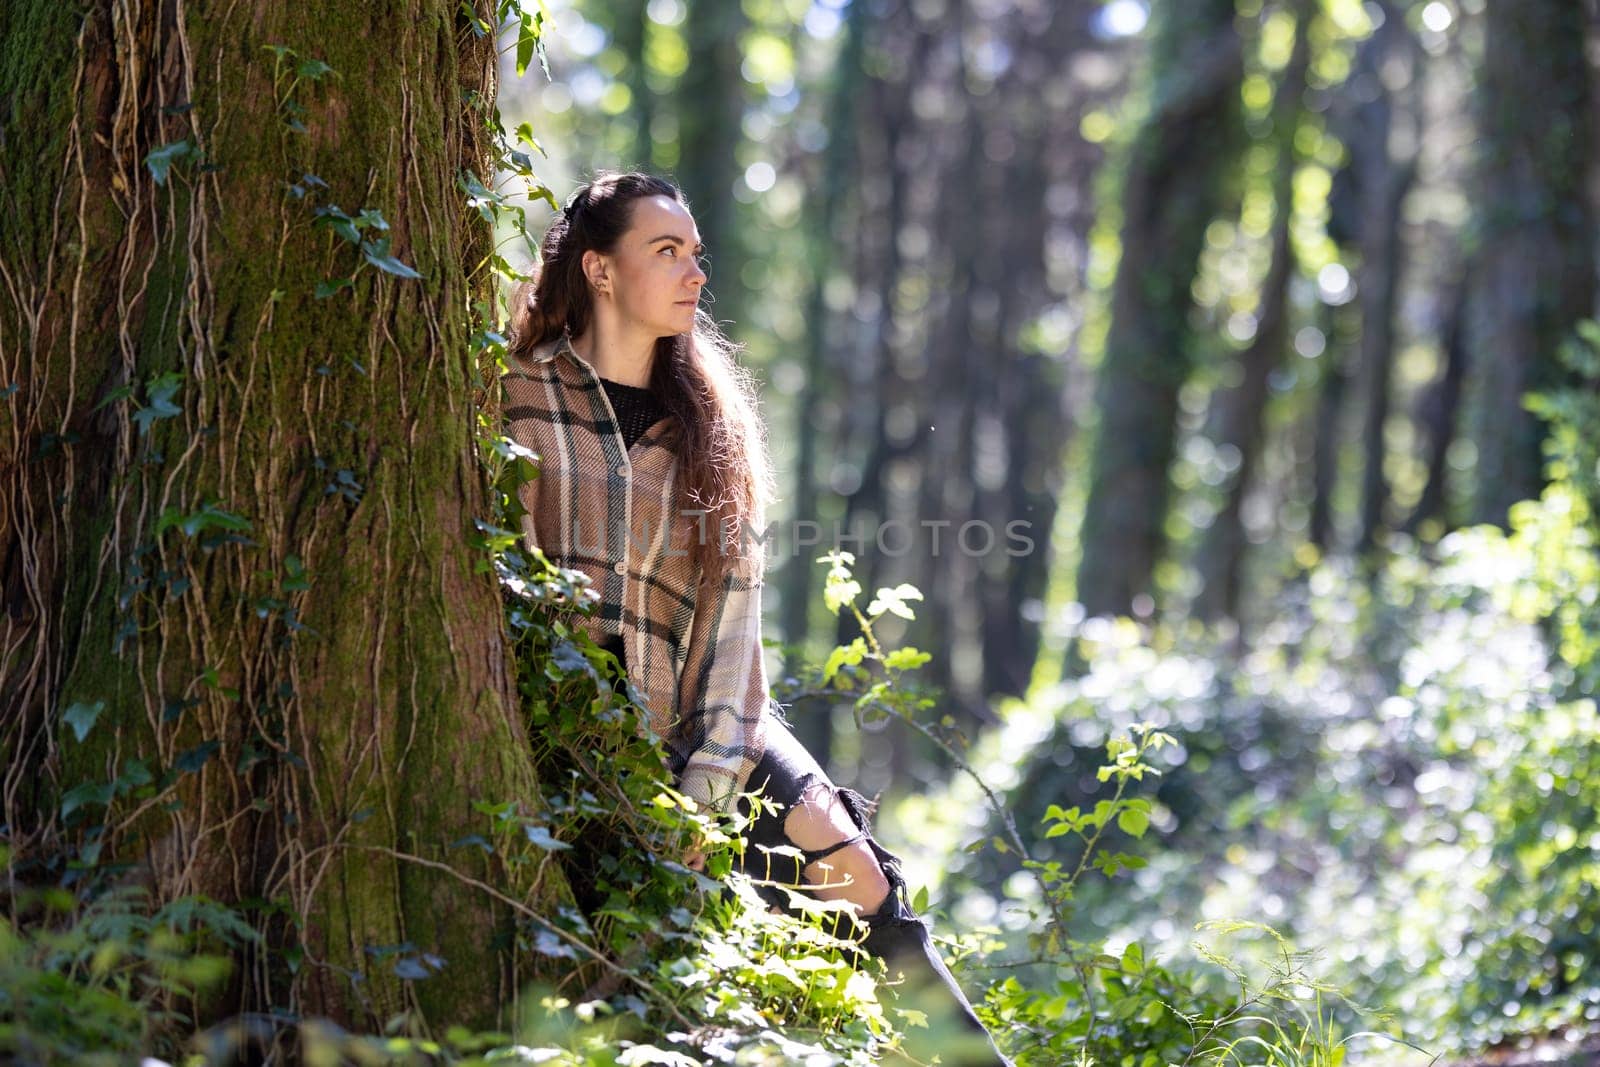 A woman stands next to a tree, surrounded by a forest. She appears to be enjoying the outdoors with friends on a sunny day.